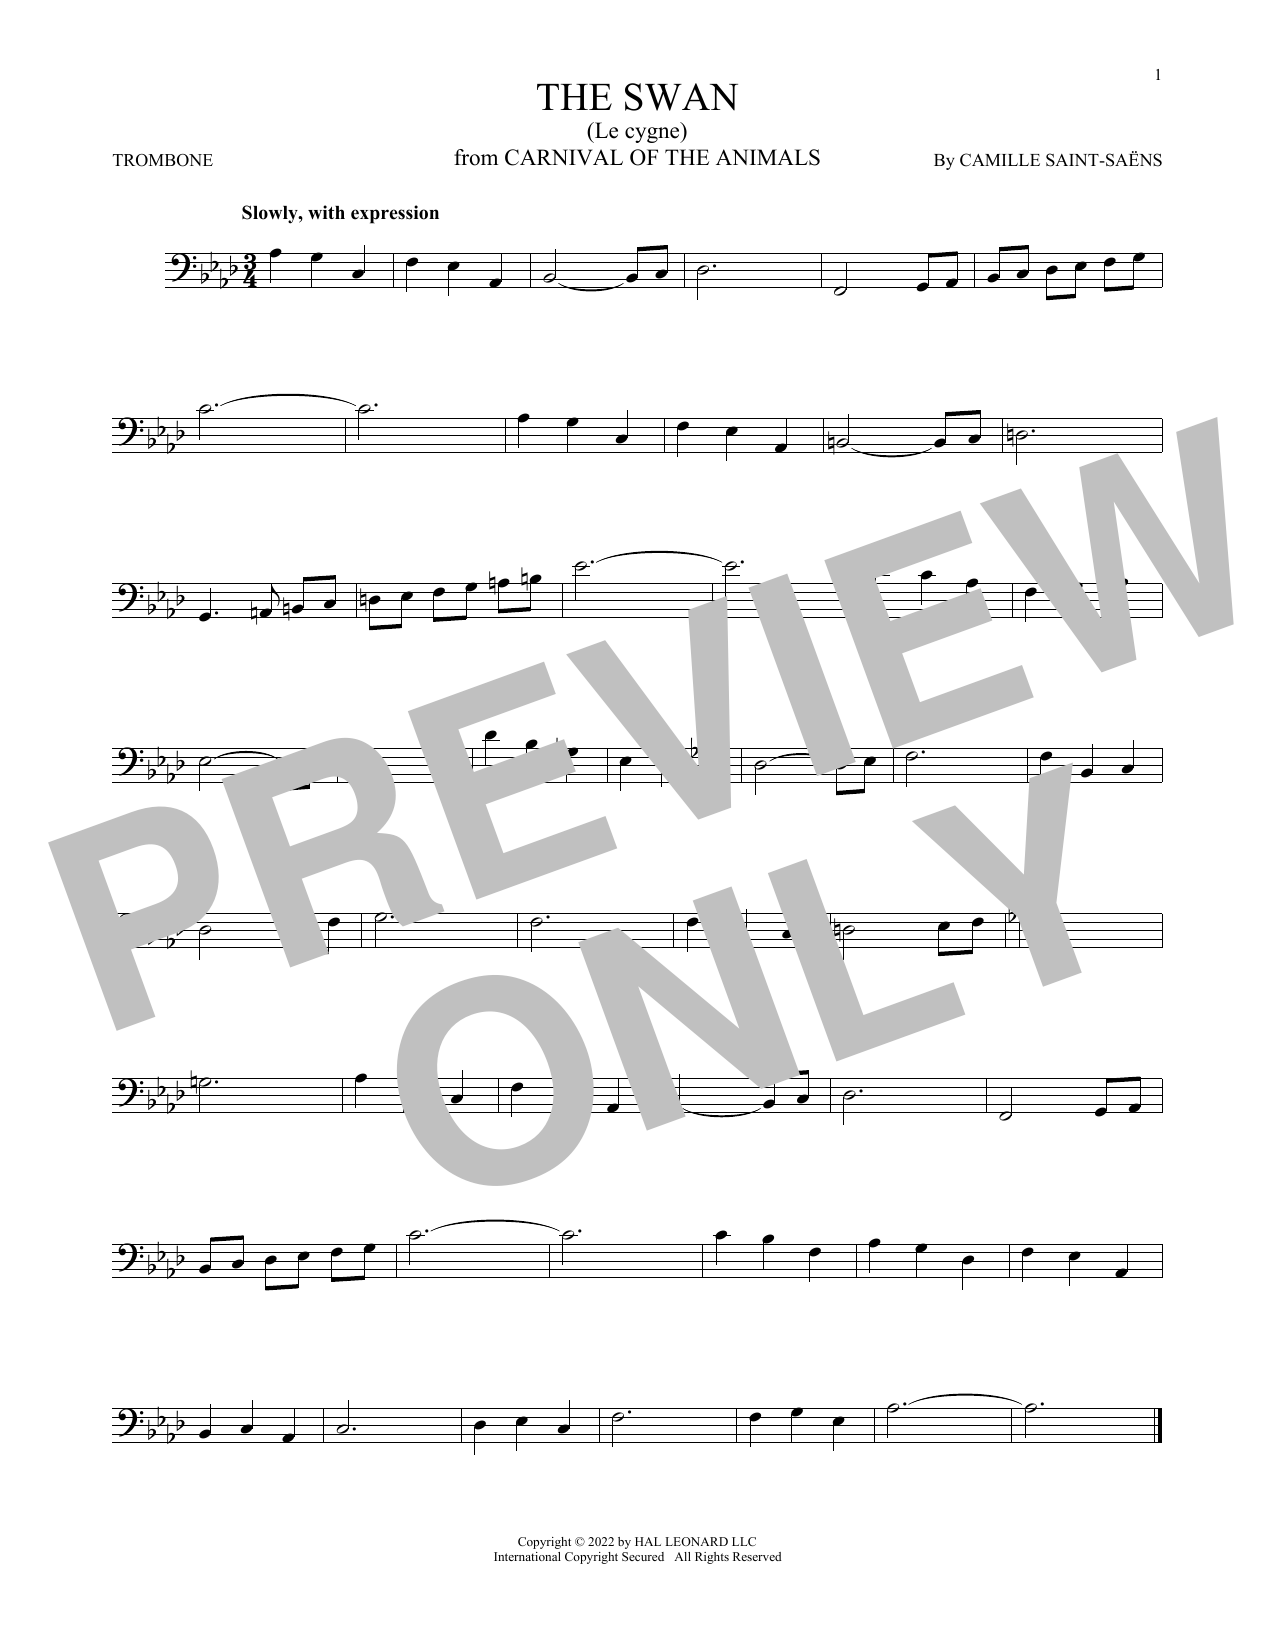 Download Camille Saint-Saens The Swan (Le Cygne) Sheet Music